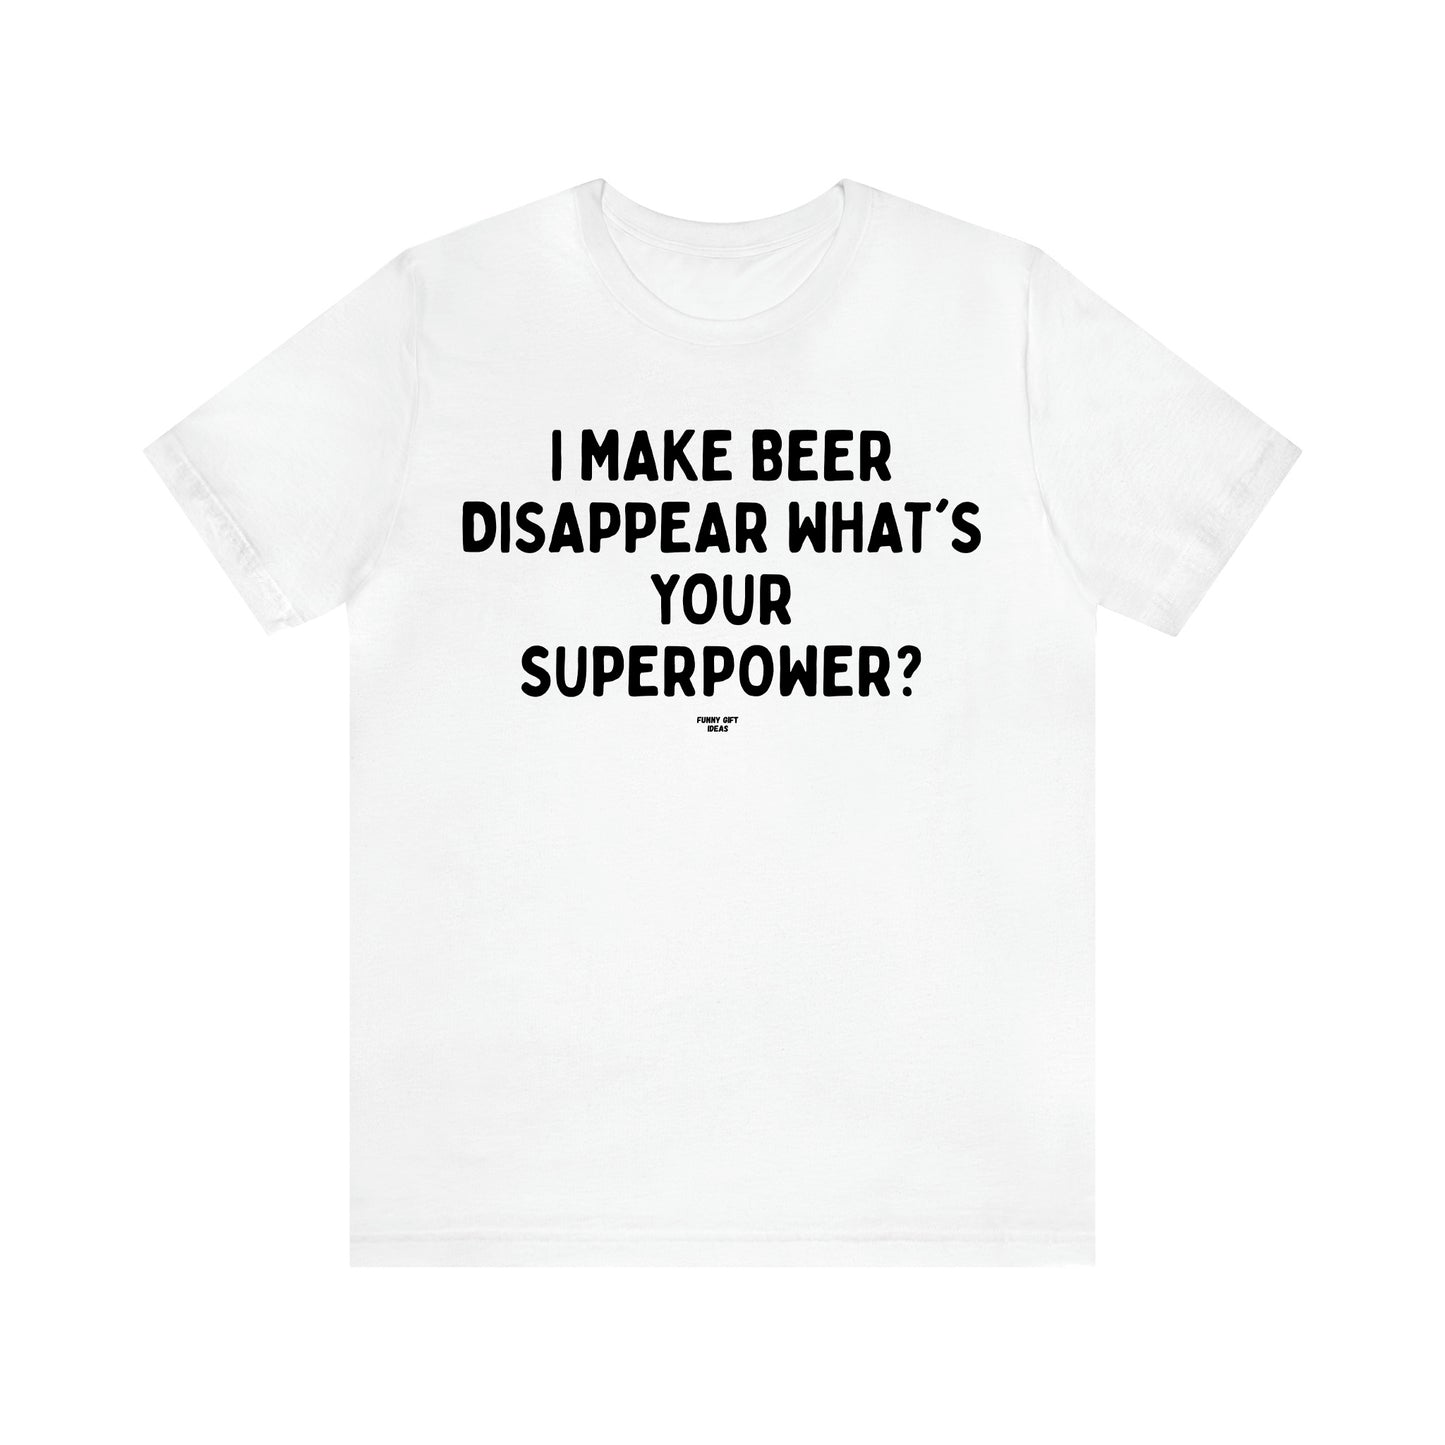 Men's T Shirts I Make Beer Disappear What's Your Superpower? - Funny Gift Ideas